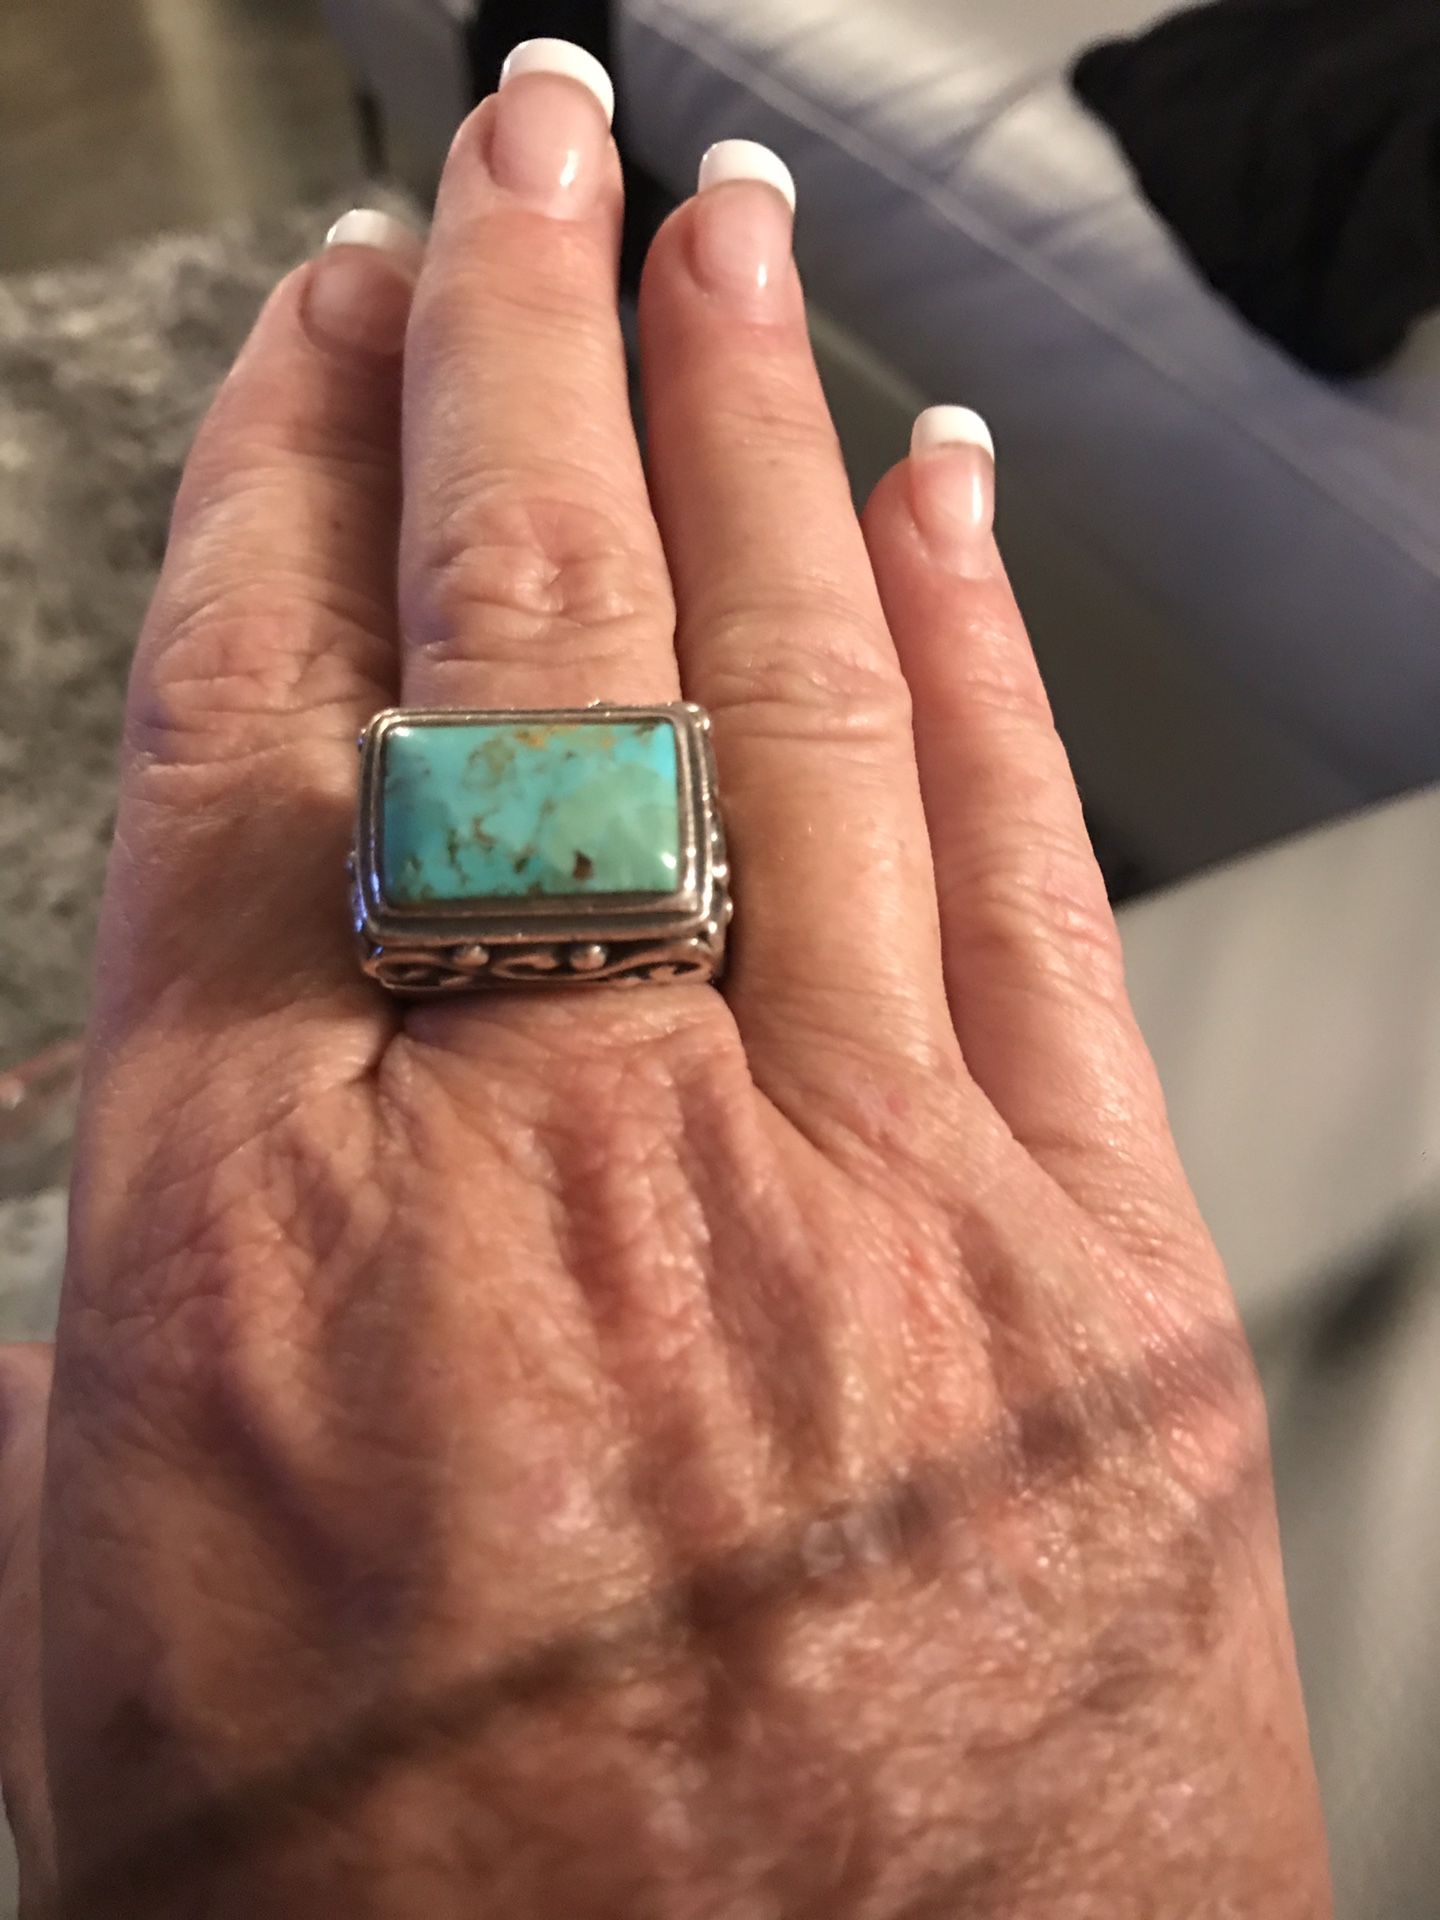 Ladies large sterling silver turquoise ring. Can be worn on any finger.